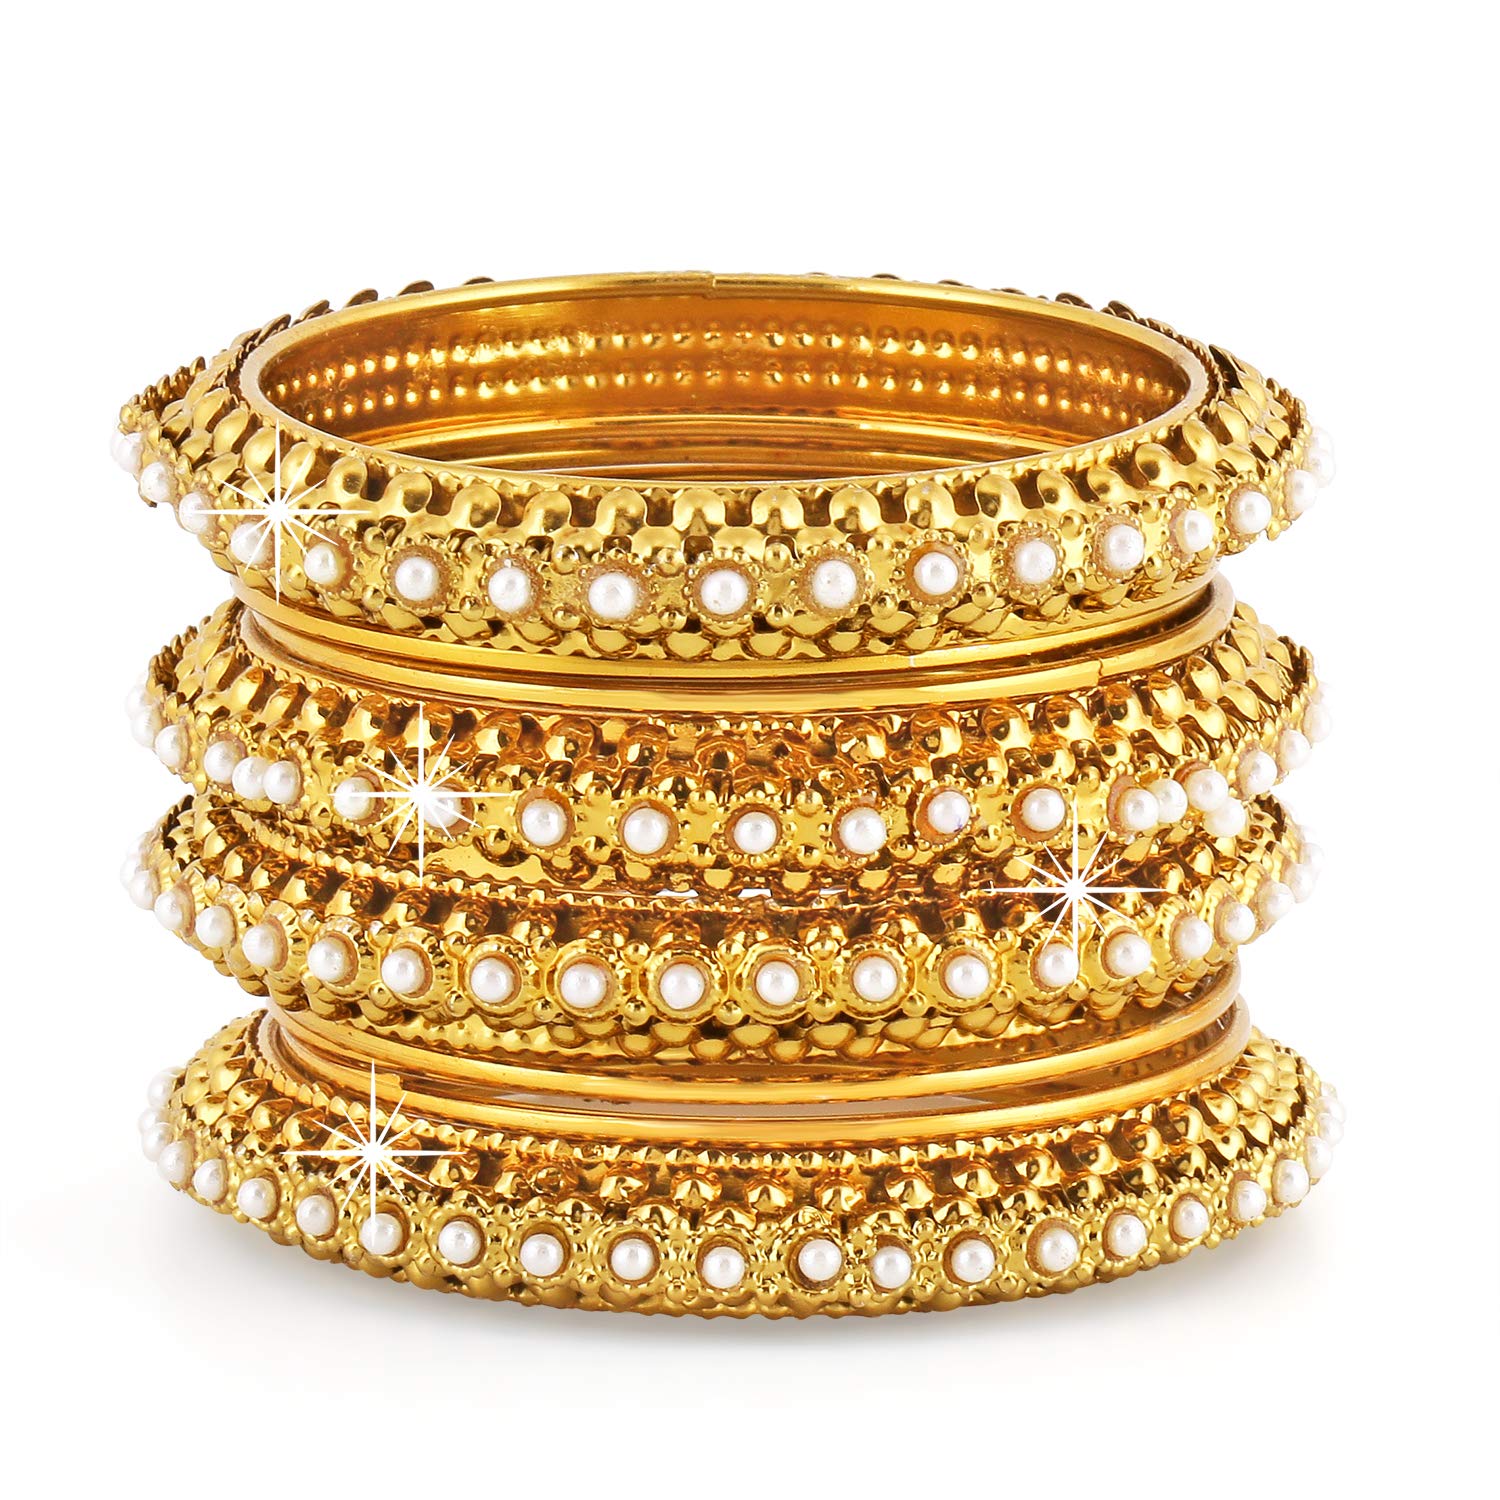 Yellow Chimes Bangles for Women Golden Bangles Set Antique Look Gold Plated Moti Traditional Bangles Set for Women and Girl's.